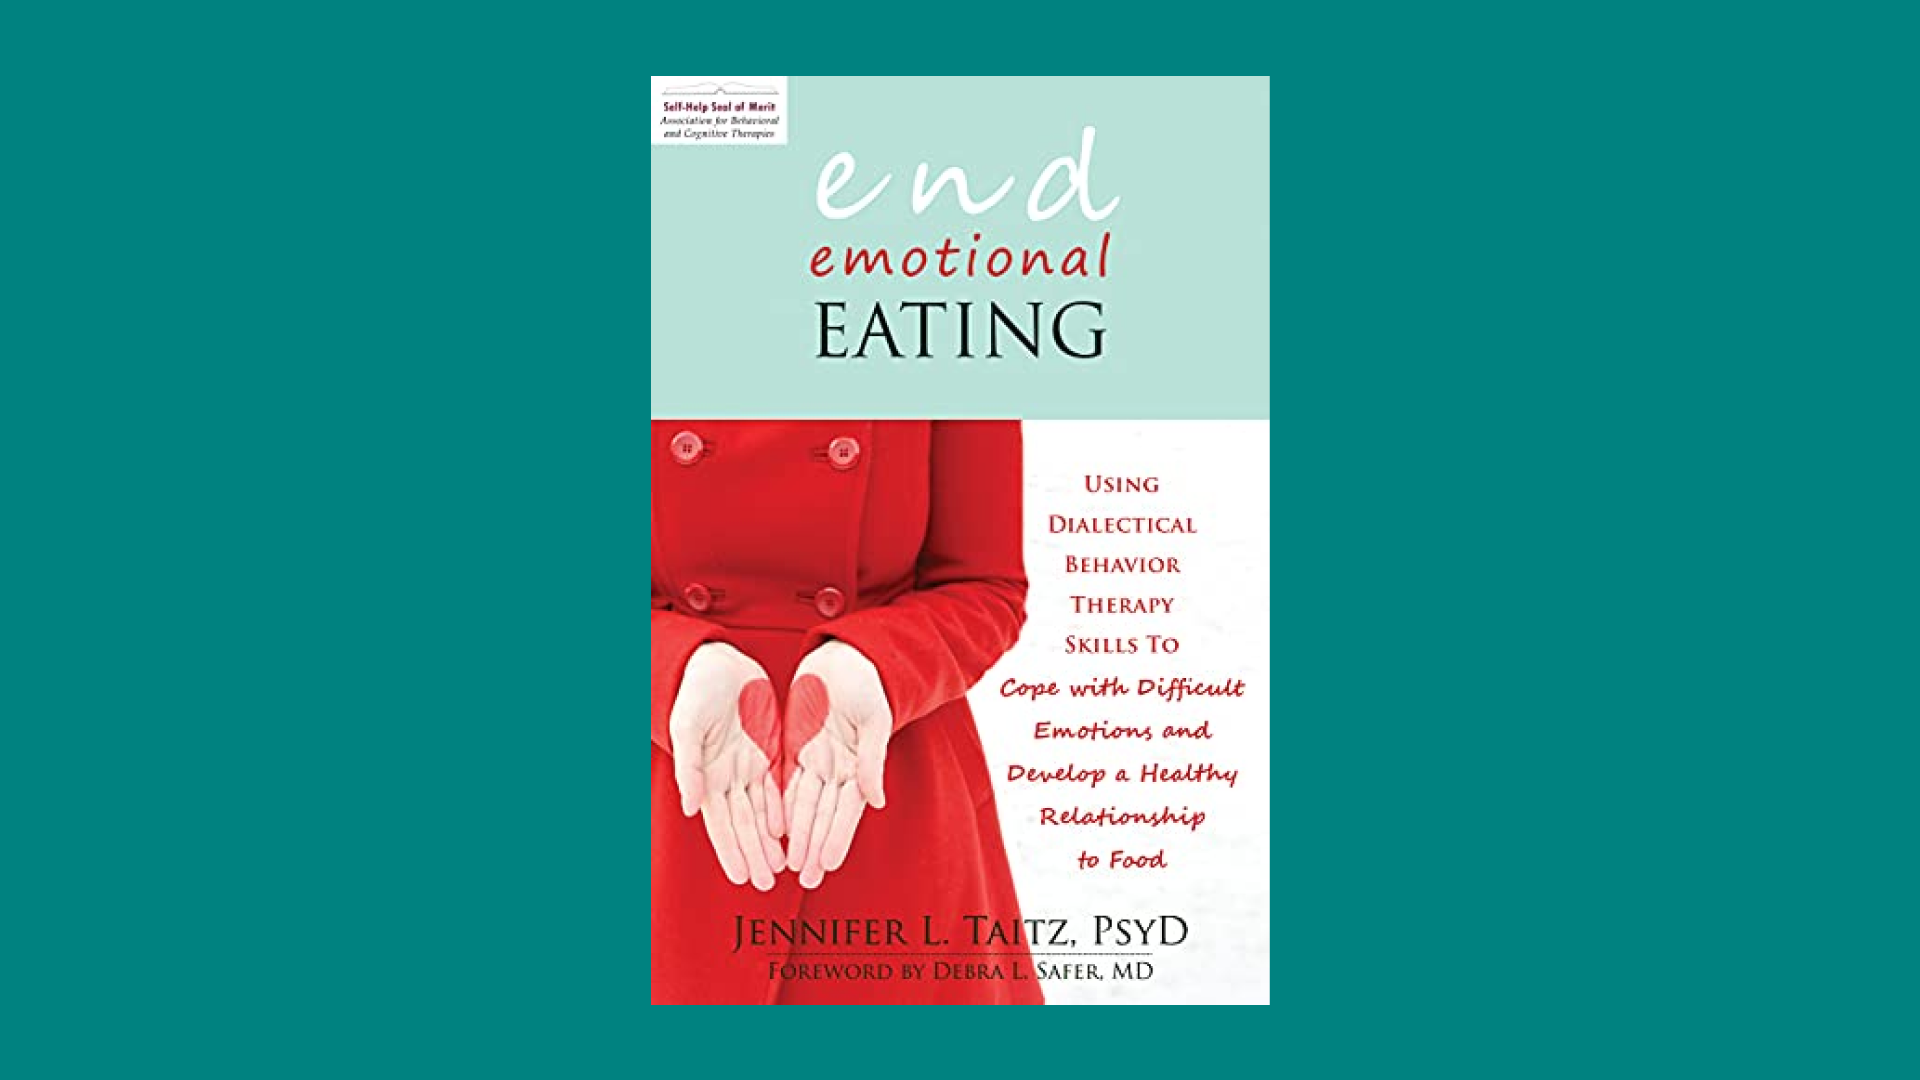 “End Emotional Eating: Using Dialectical Behavior Therapy Skills to Cope with Difficult Emotions and Develop a Healthy Relationship to Food” by Jennifer Taitz